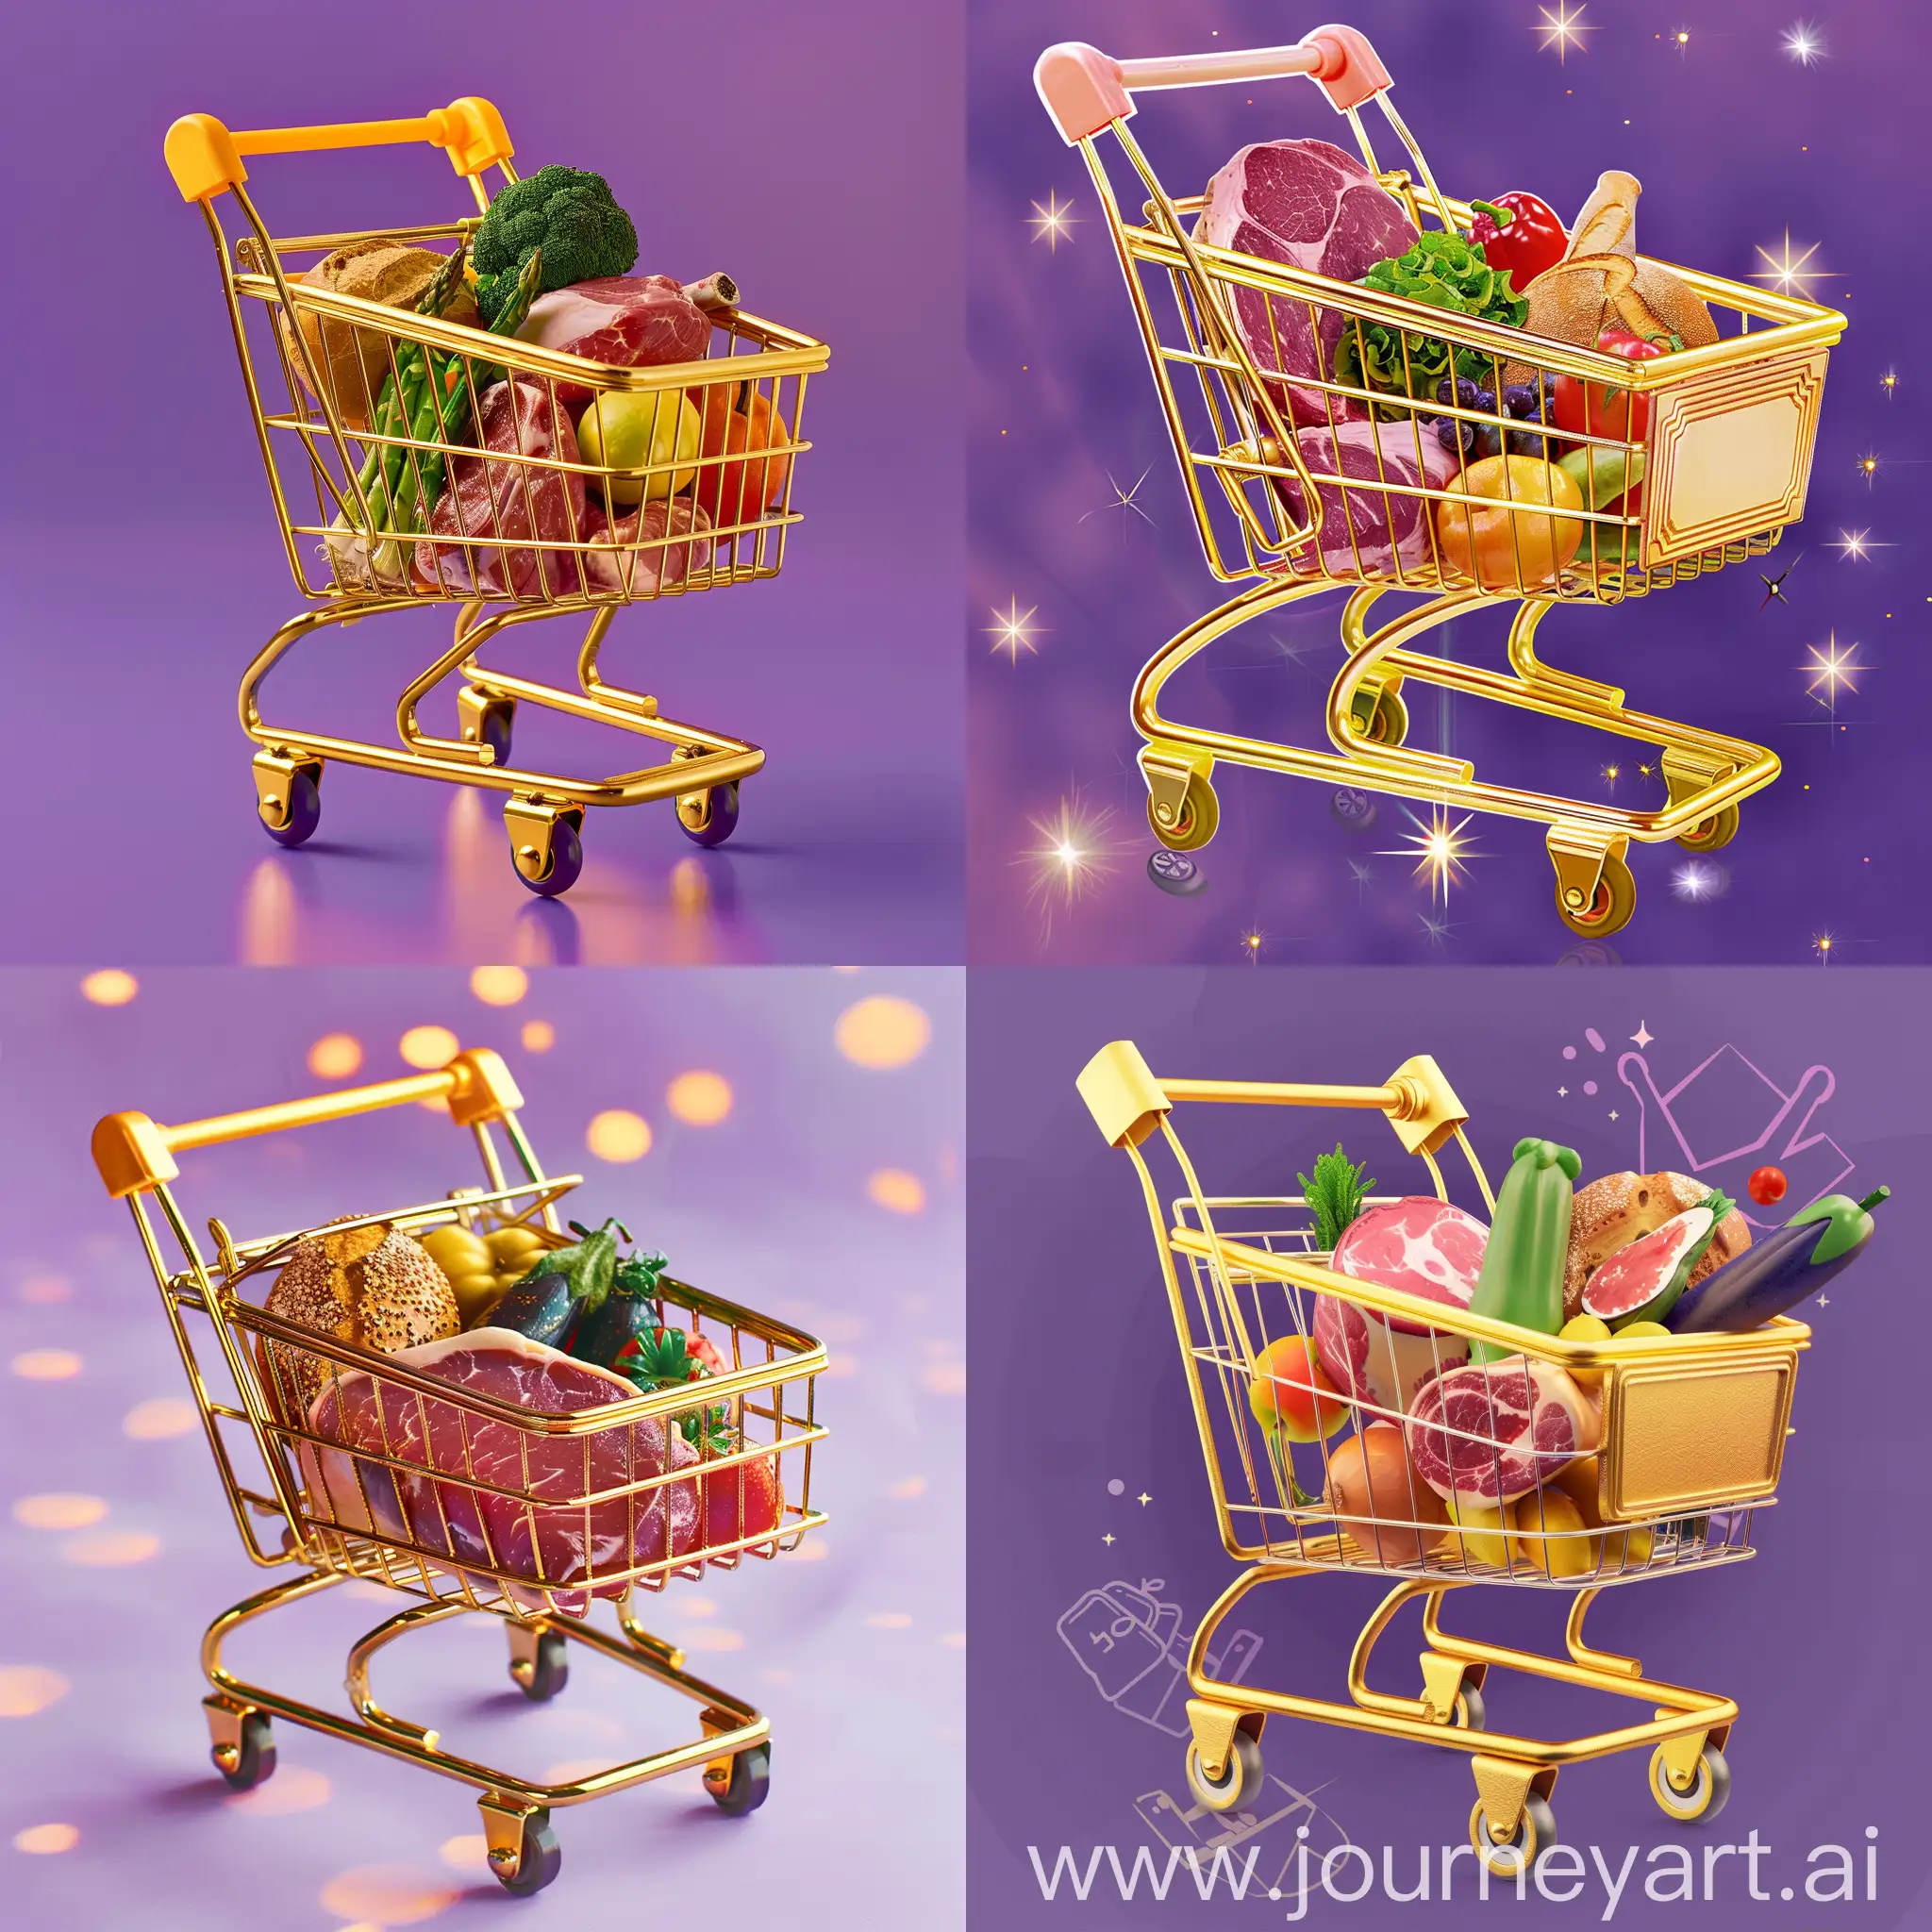 Golden-Magic-Wheeled-Shopping-Cart-with-Meat-Fruit-Vegetables-and-Bread-on-Purple-Background